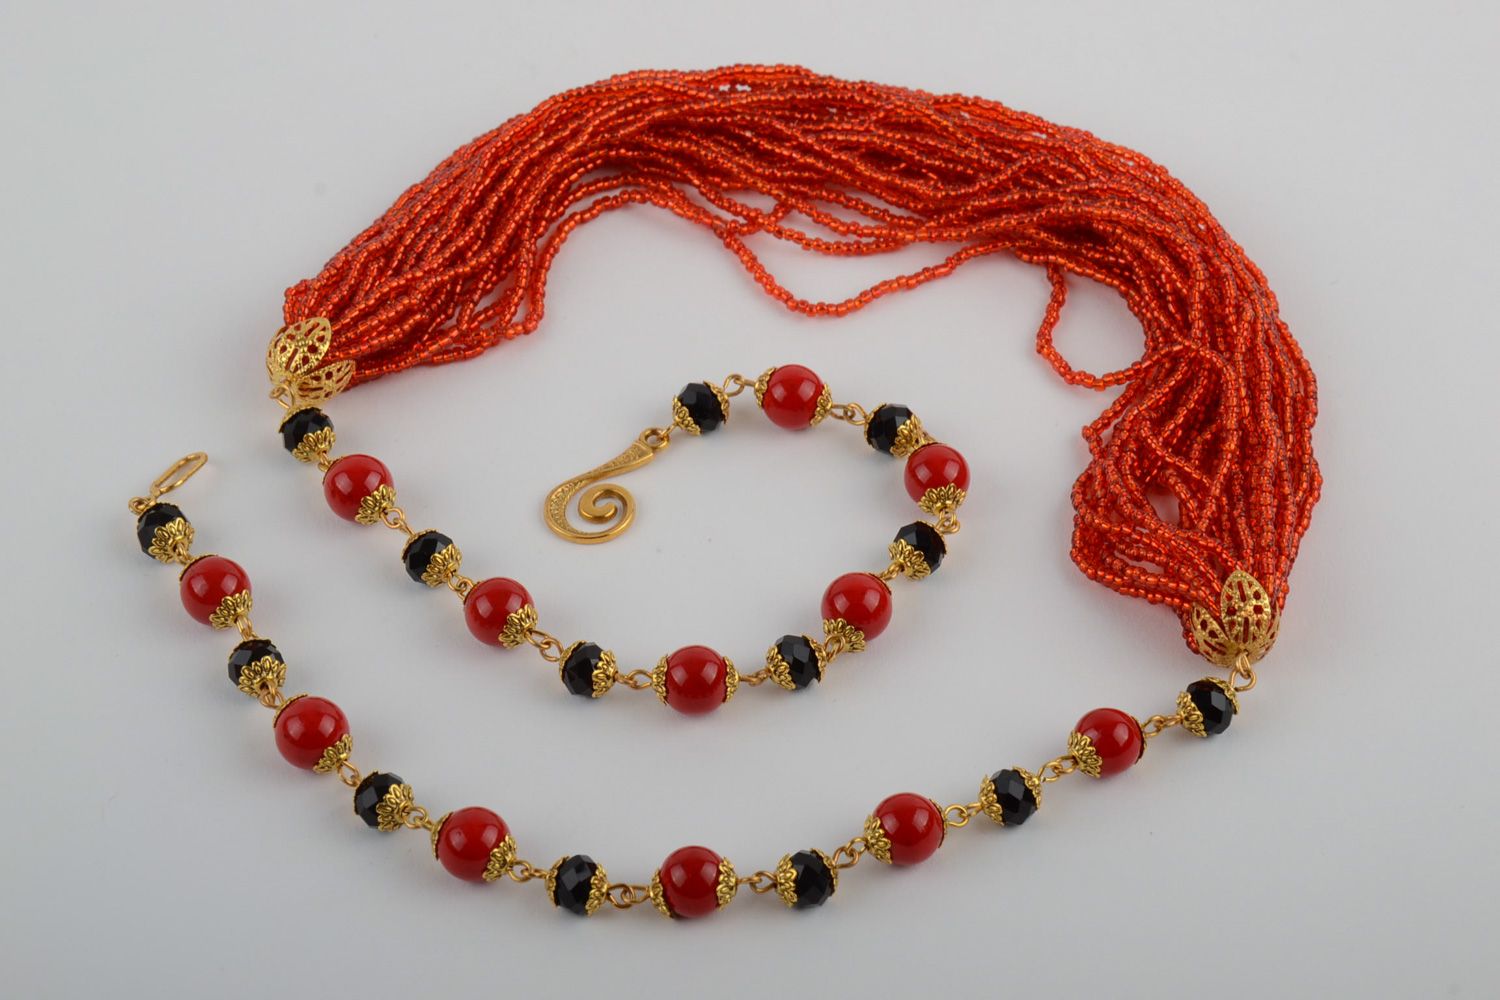 Handmade multi row necklace woven of Czech and wooden beads of red and black colors photo 4